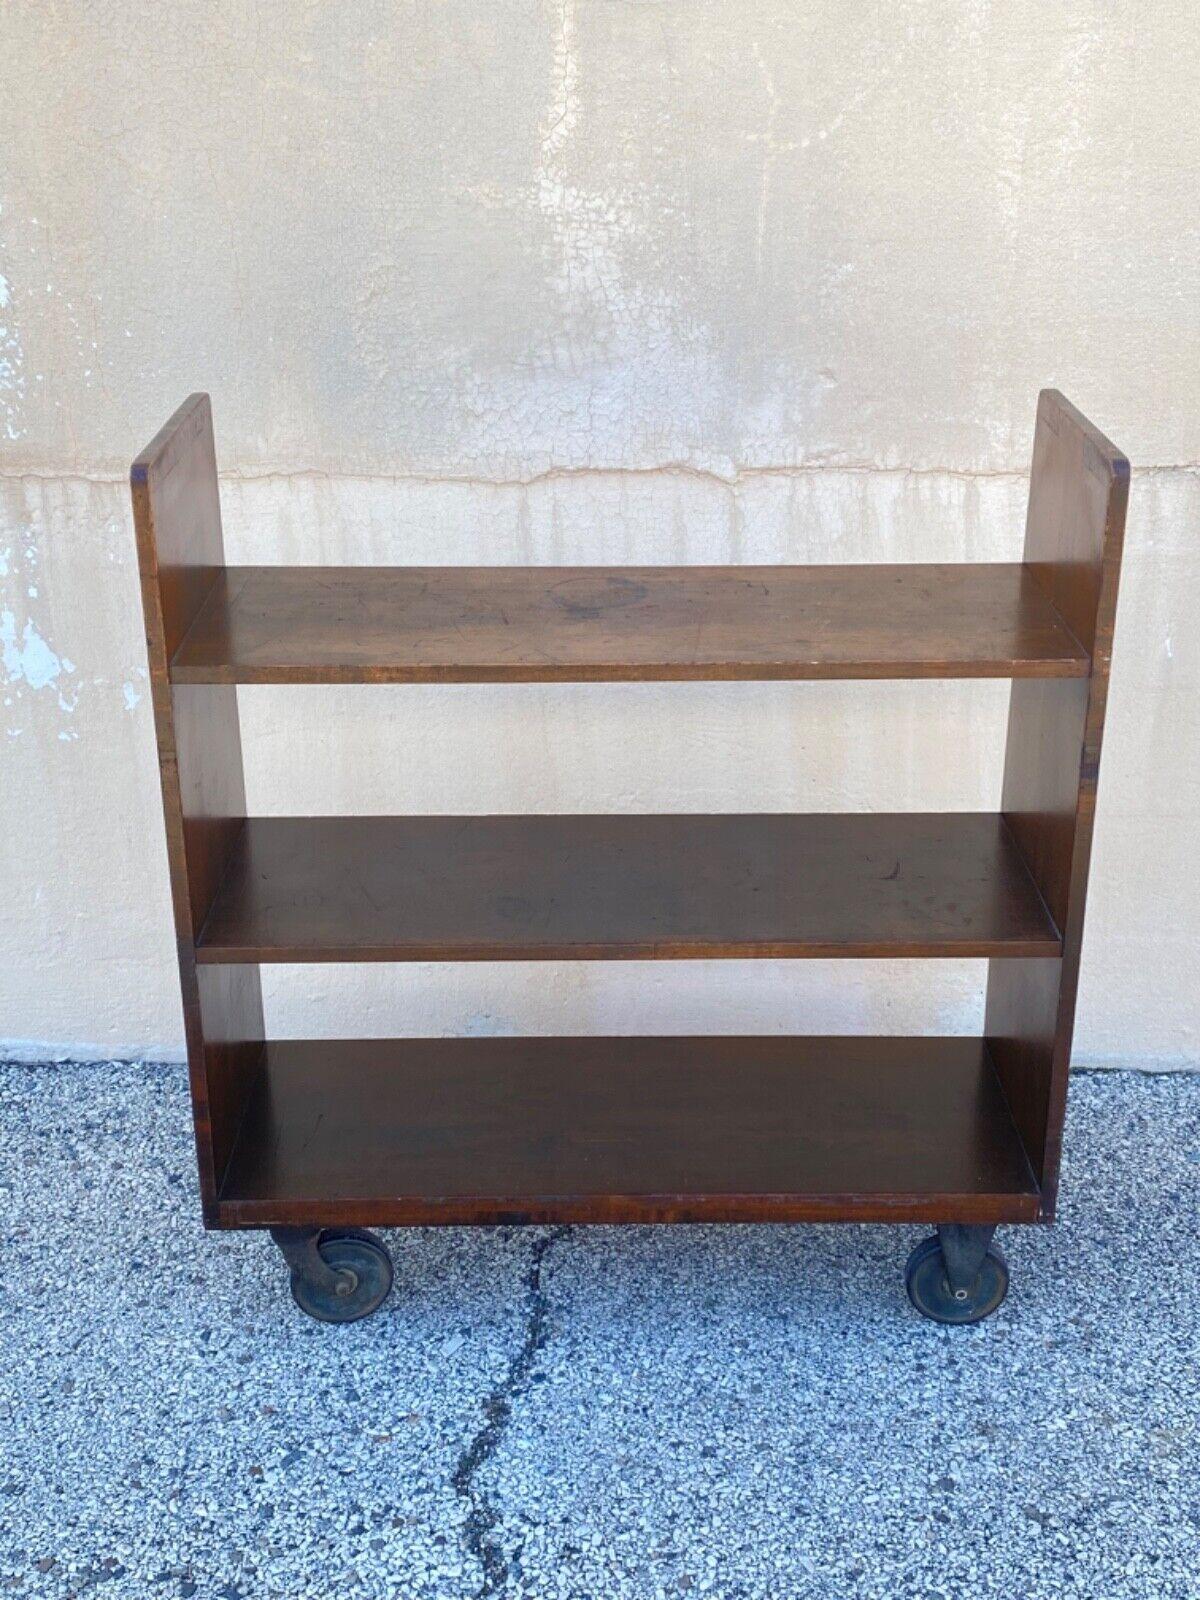 Vintage Arts & Crafts Wooden Rolling Library Book Cart Bookshelf with Cast Iron Wheels. Circa 1950s. Measurements: 43